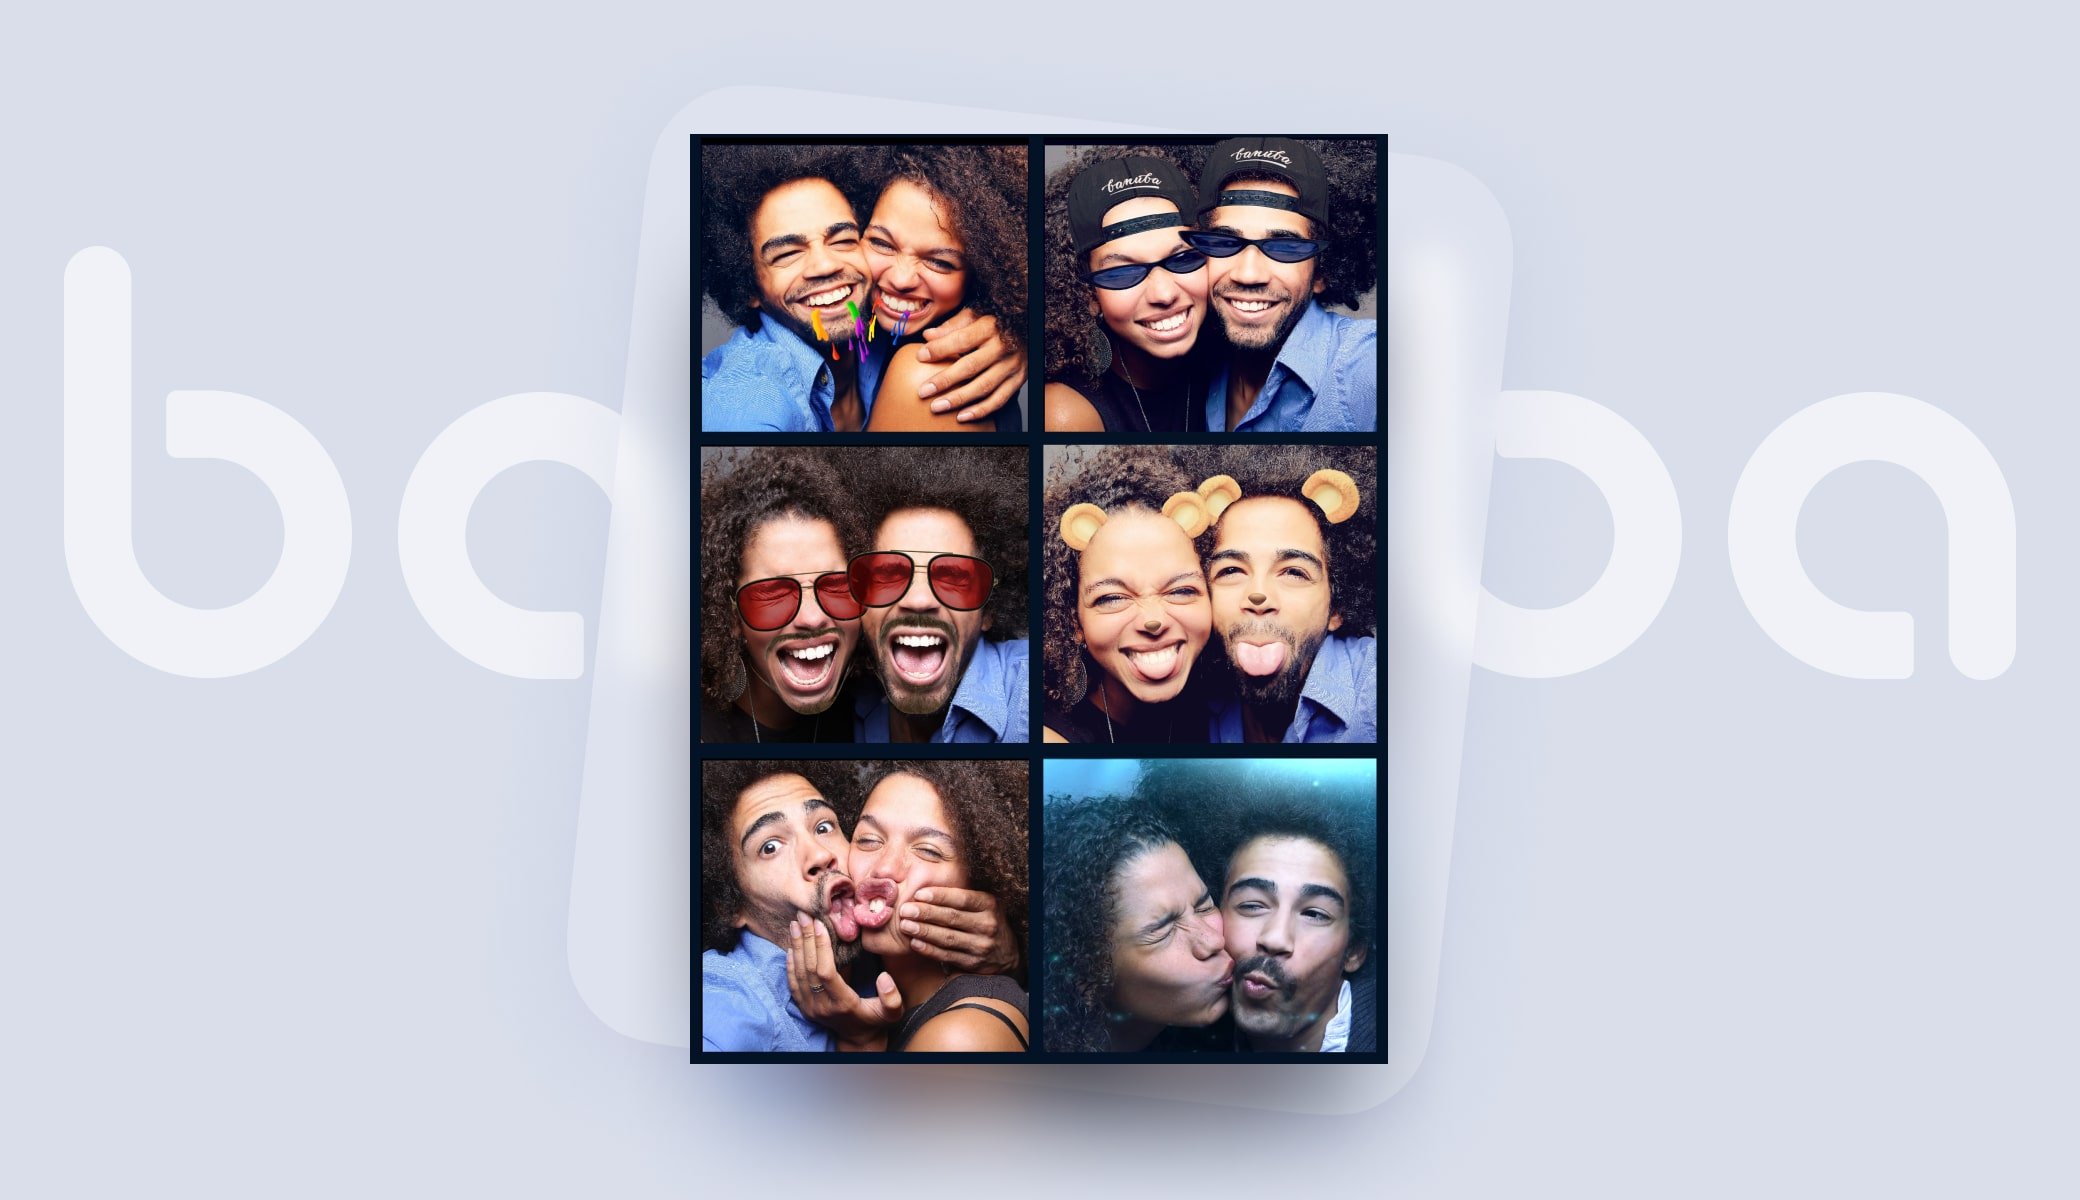 Comparing Best Photo Booth Software Solutions for 2022